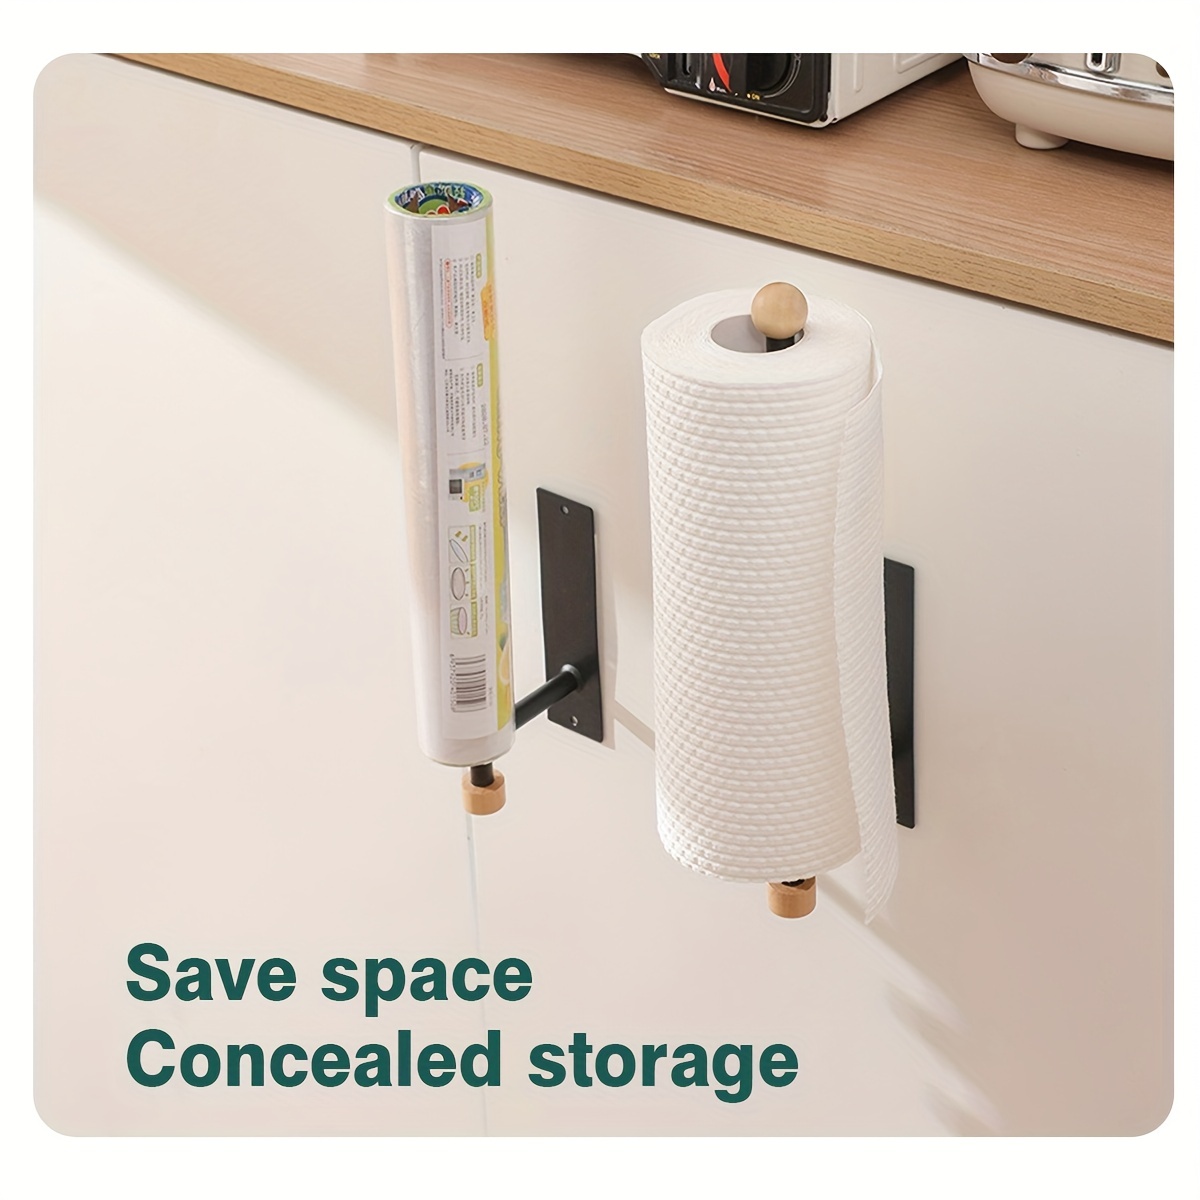 Space-Saving Wall-Mounted Metal Paper Towel Holder with Shelf